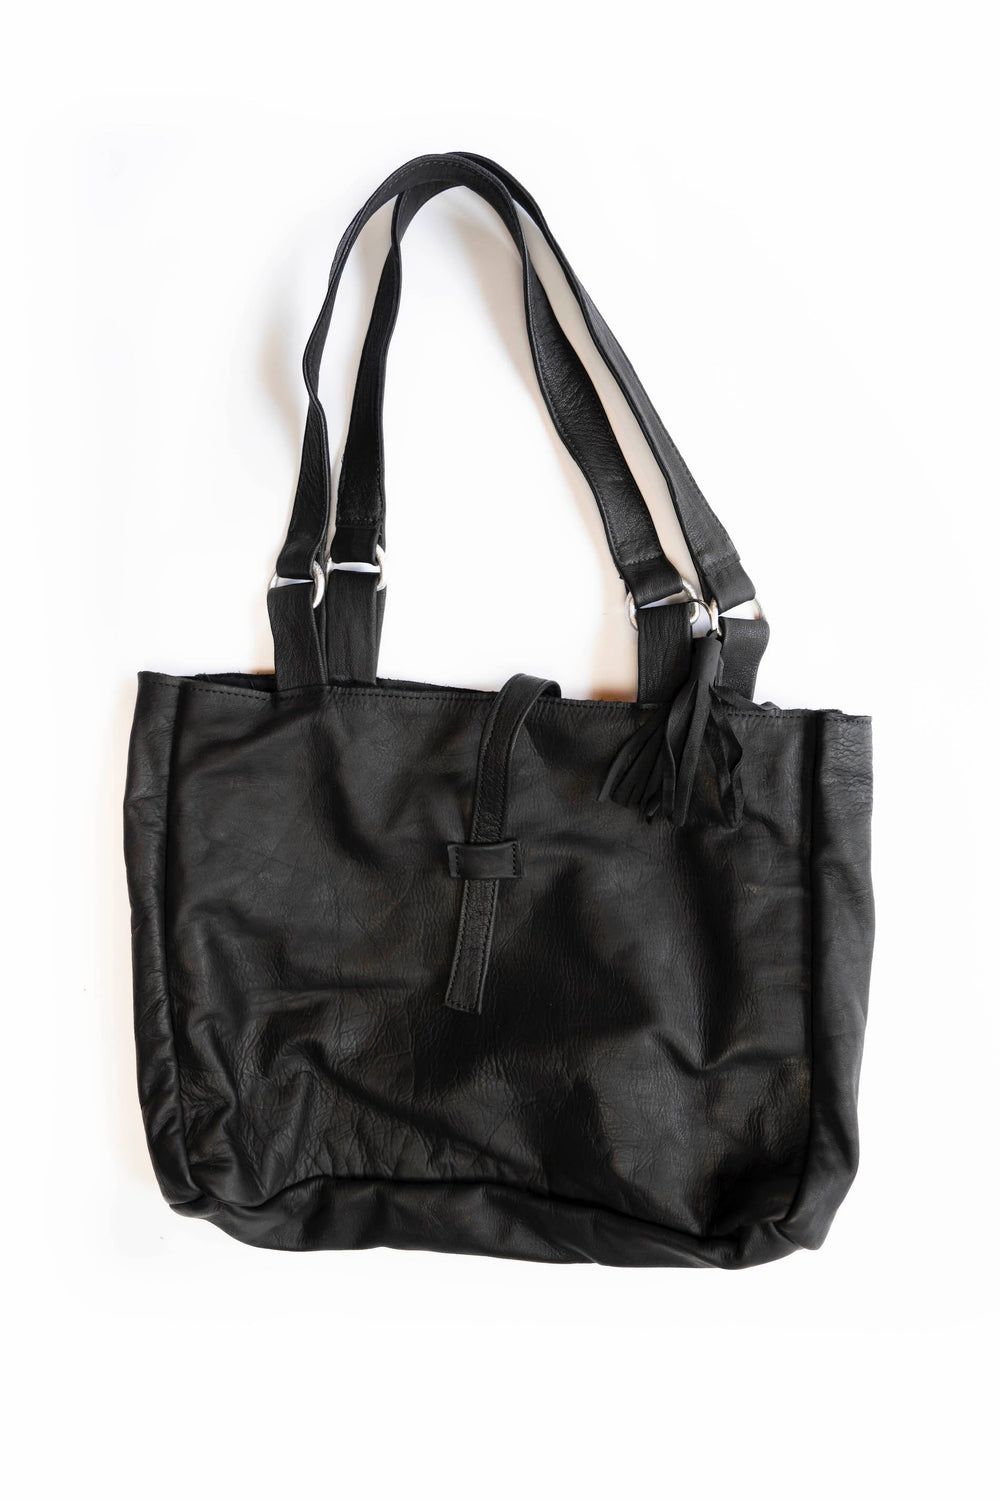 Black Sheep Tote by 2nd Story Goods